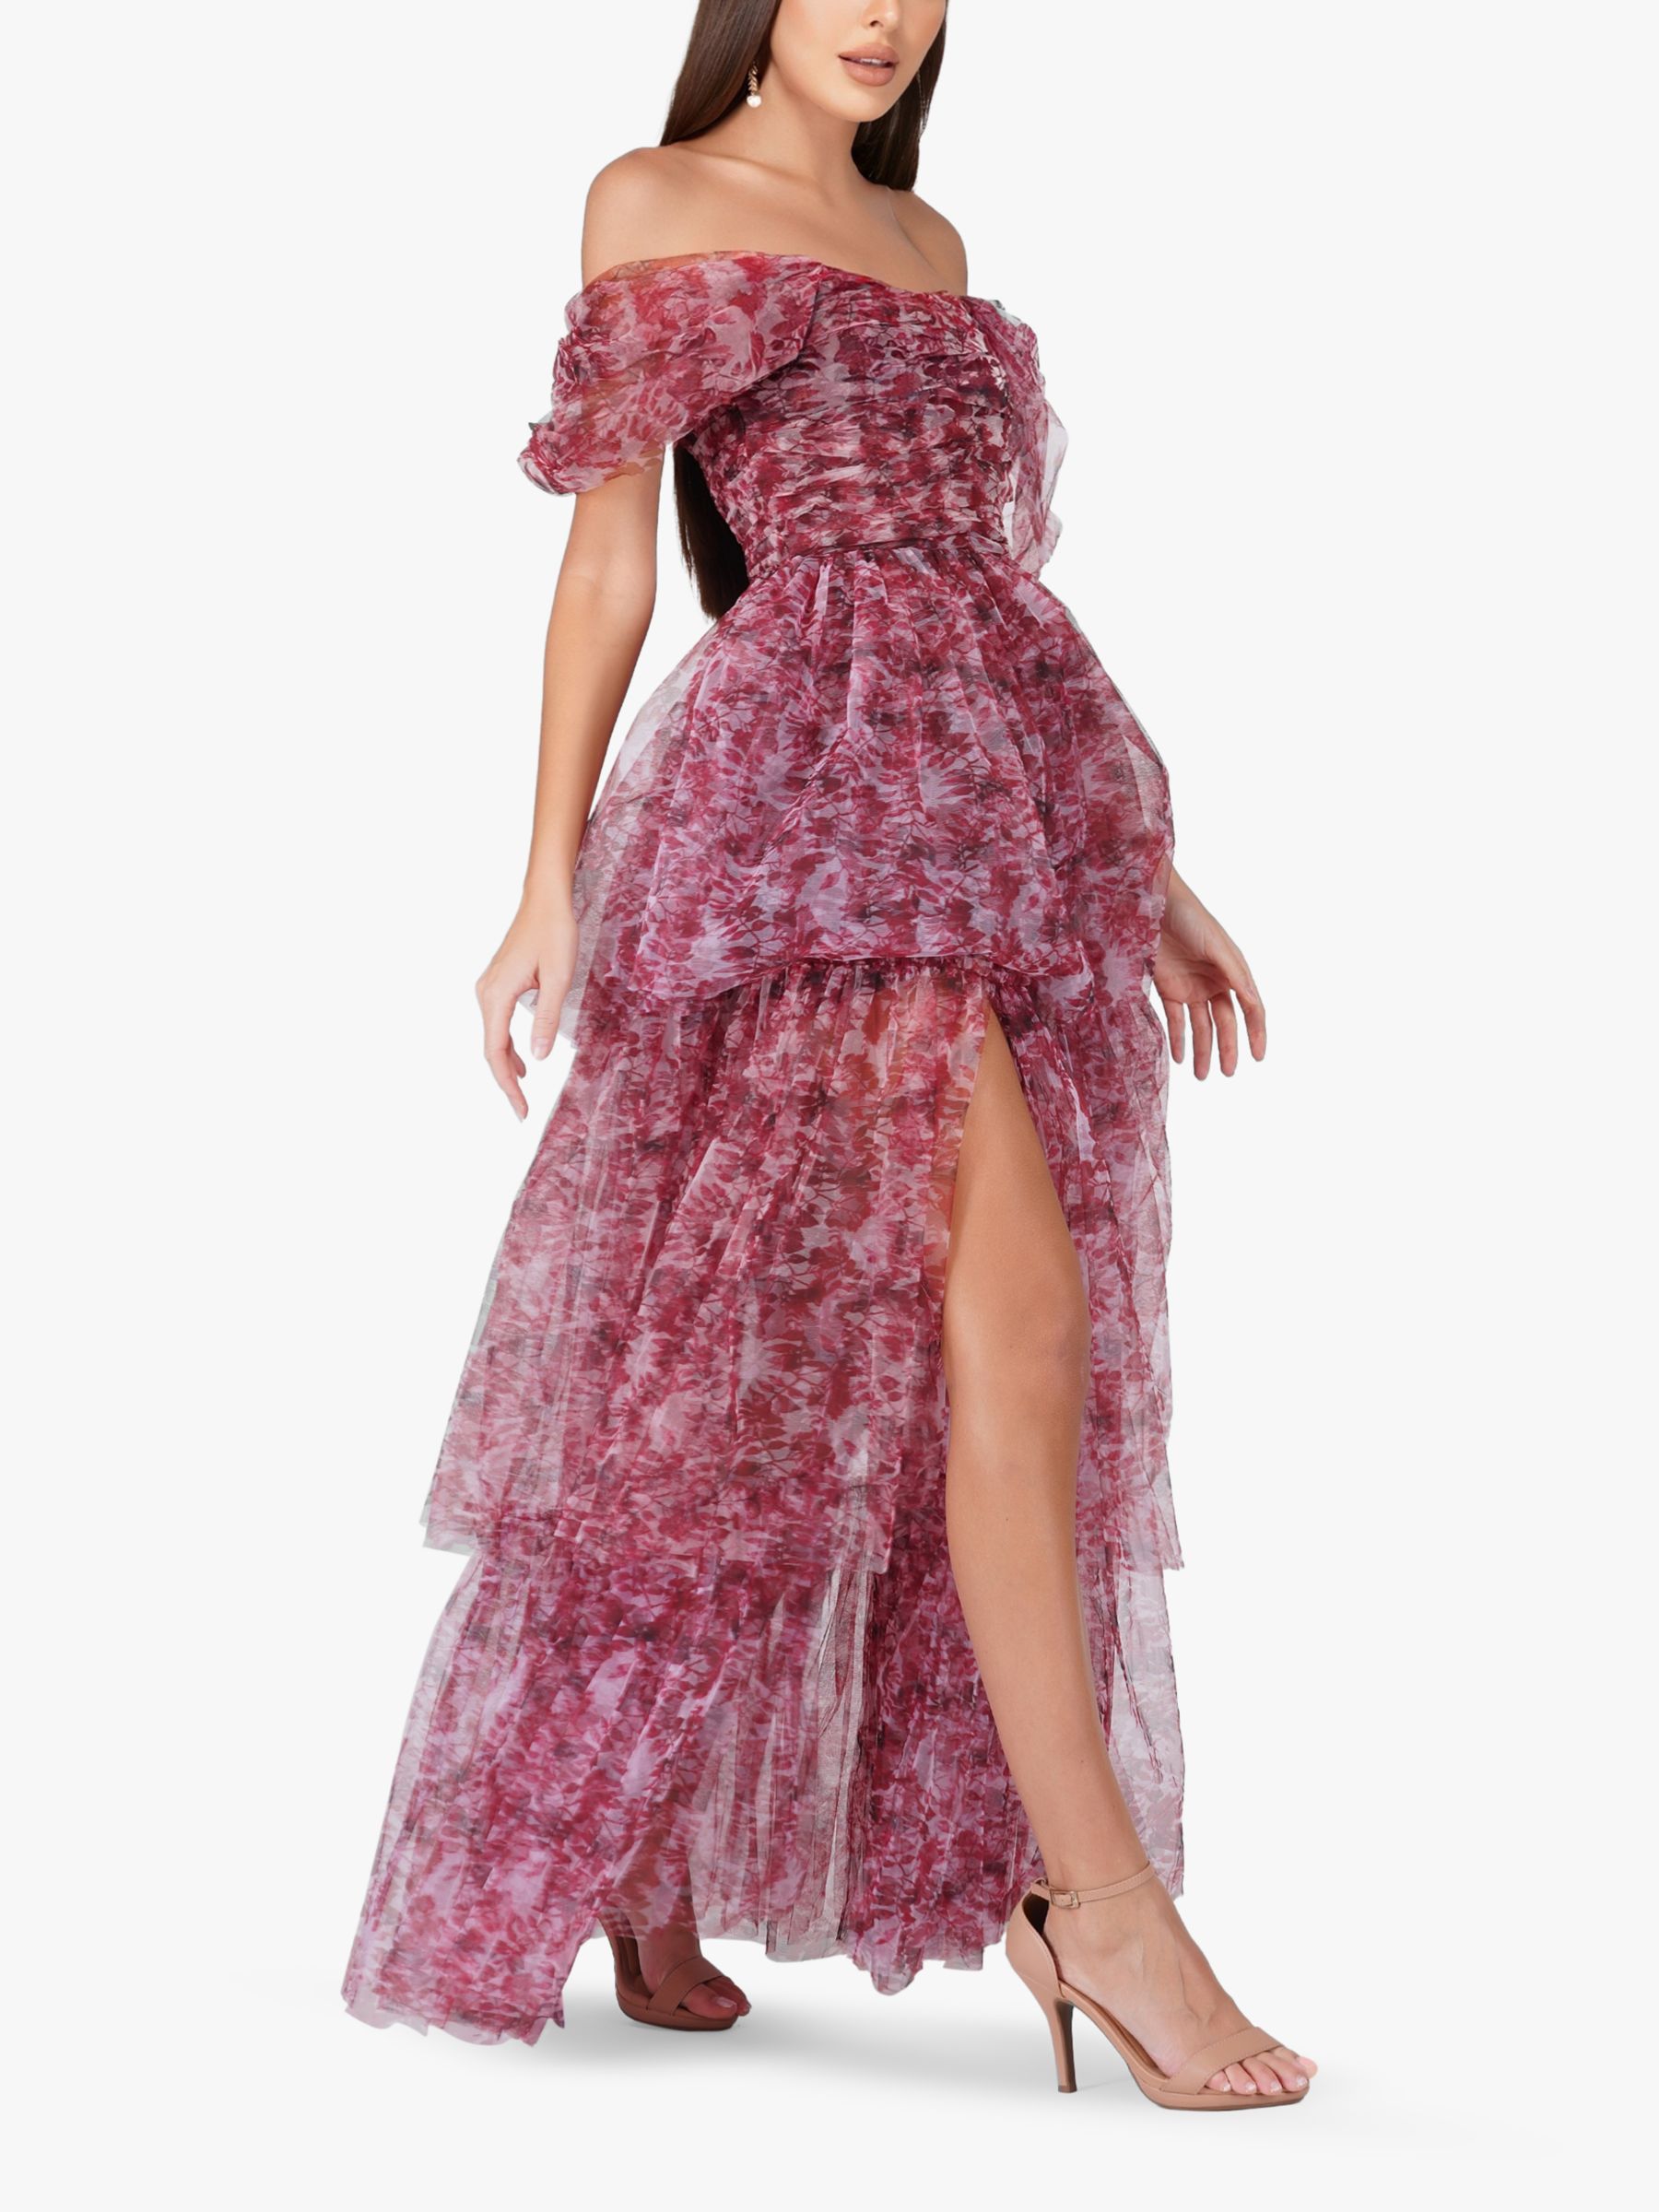 Buy Lace & Beads Sydney Tulle Tiered Maxi Dress, Burgundy Print Online at johnlewis.com